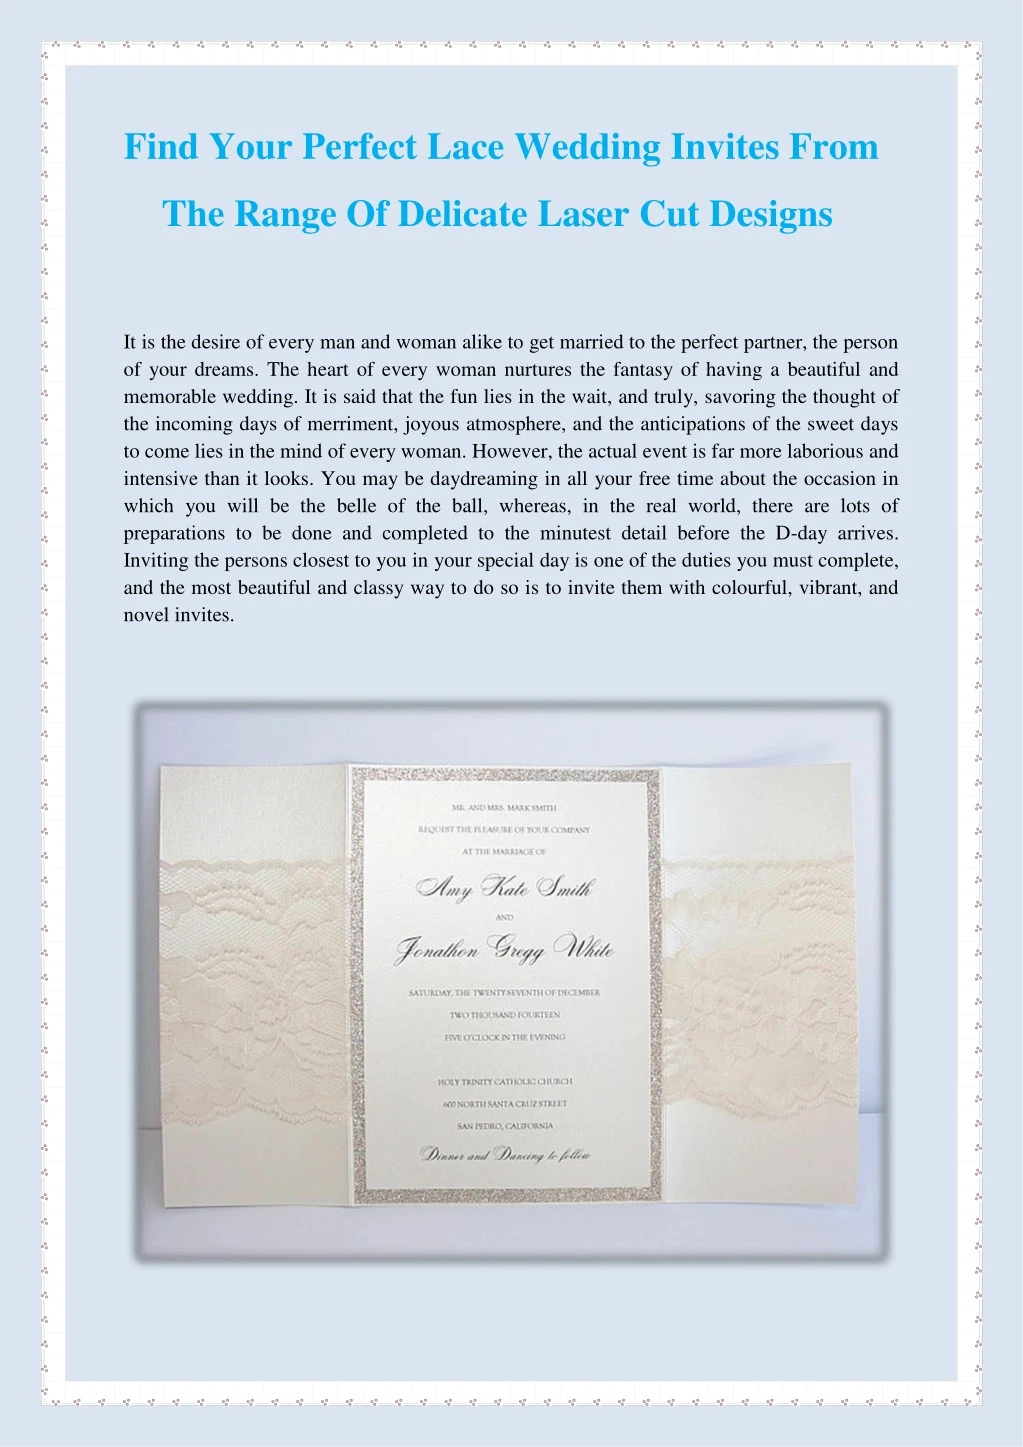 find your perfect lace wedding invites from